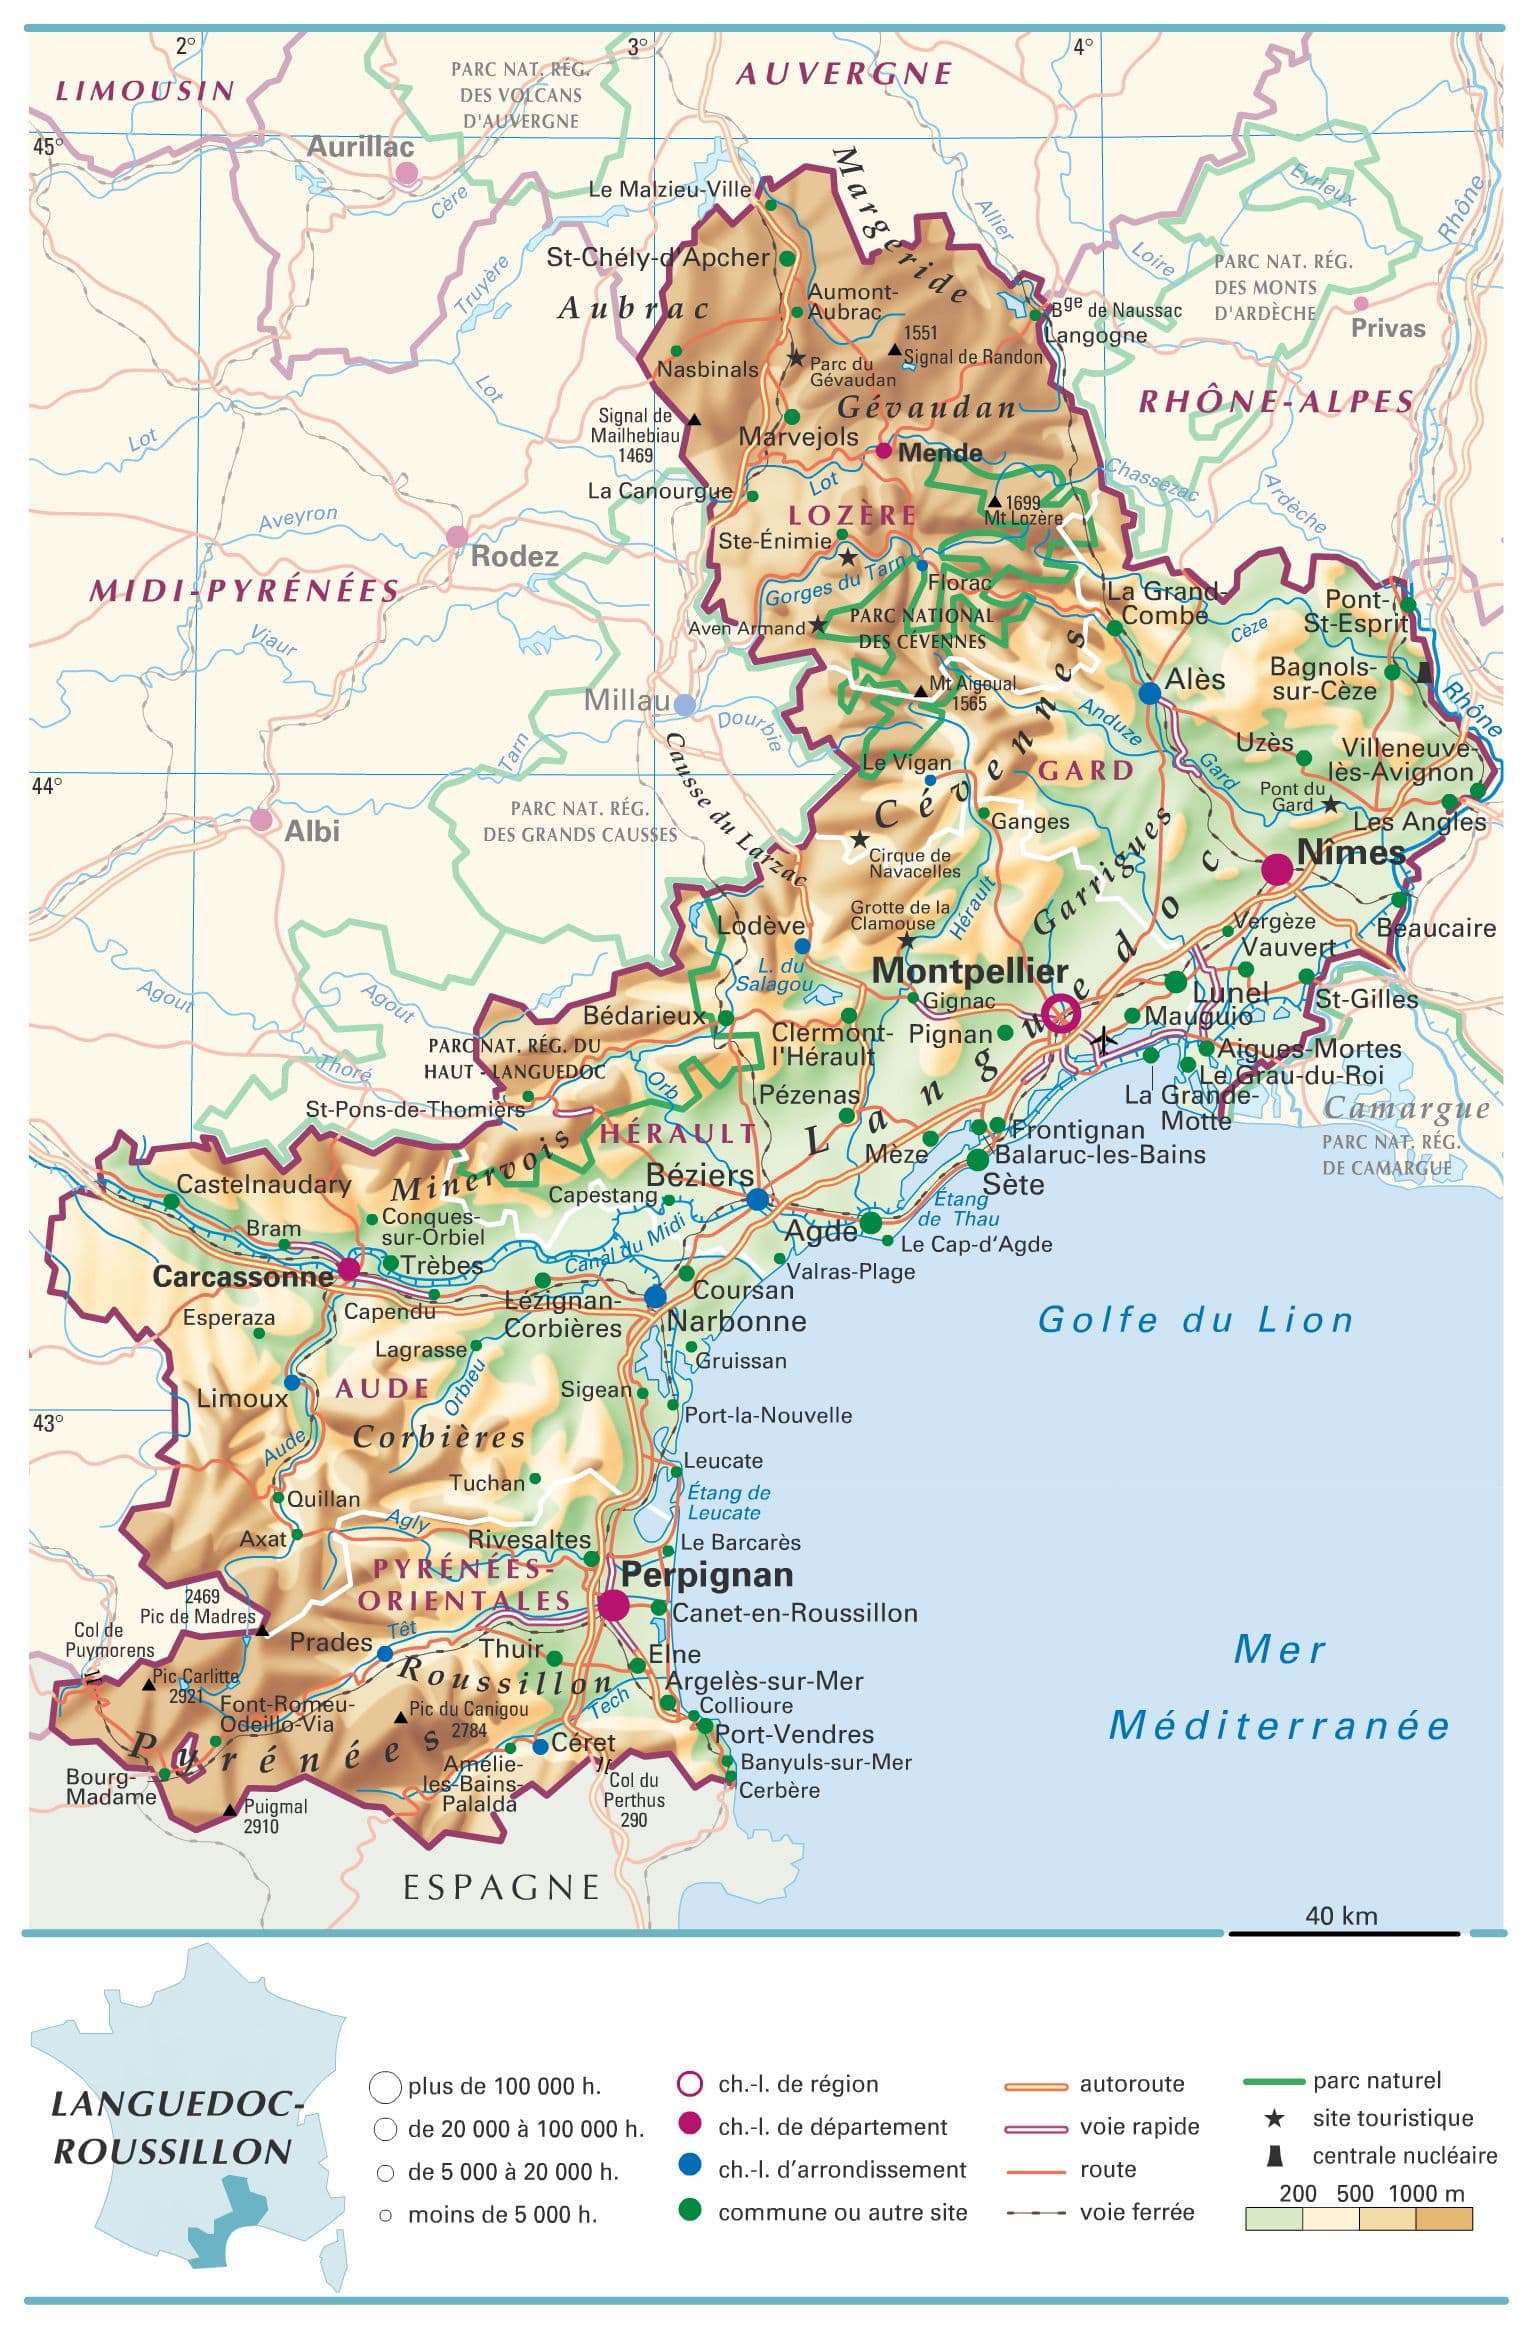 1309230 Languedoc Roussillon.HD 